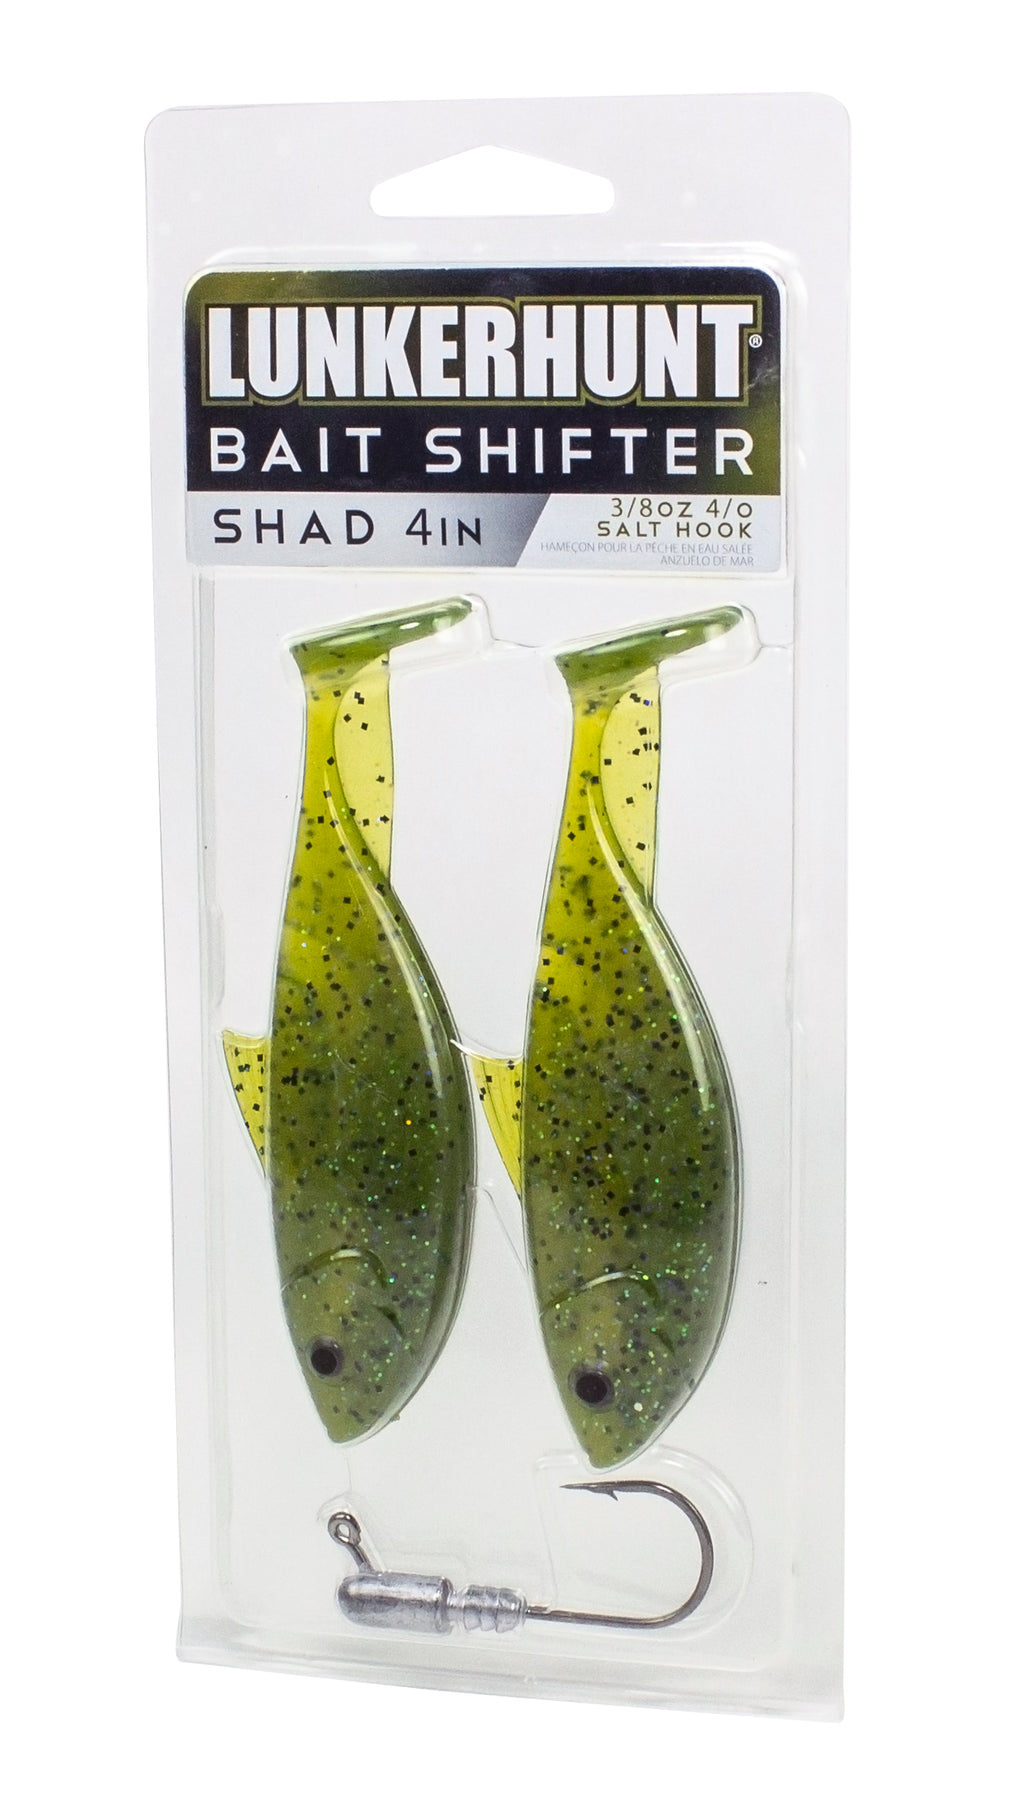 2020 New Product Releases - Bait Shifters